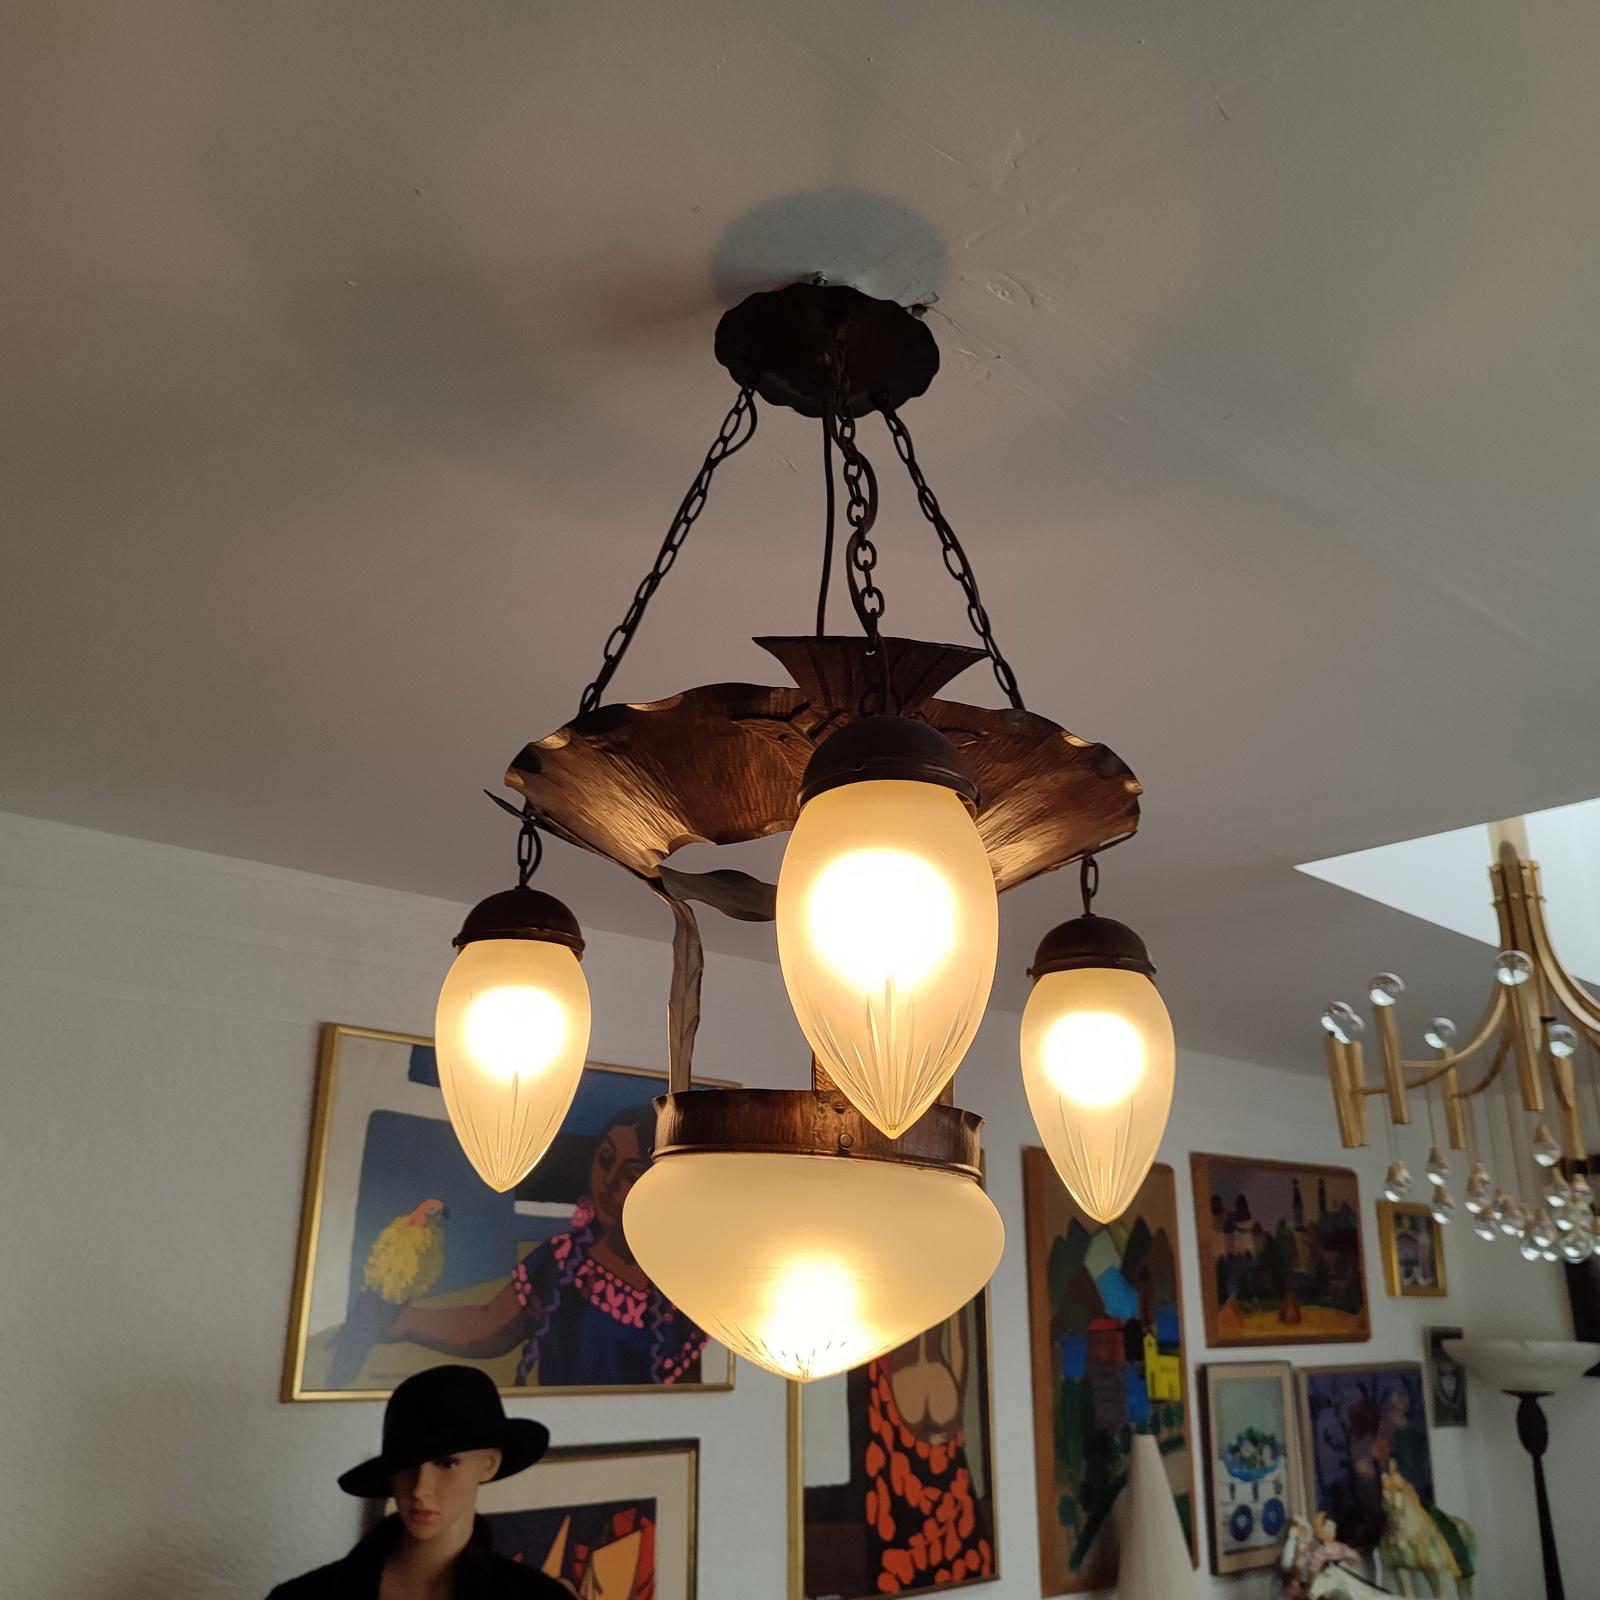 Fine Swedish Jugendstil suspension light from the 1910-1920s. The body is made of copper, entirely hammered. There are three lights embedded around the rim and a central one with a cut satin glass diffuser. Four original ceramic E27 sockets,